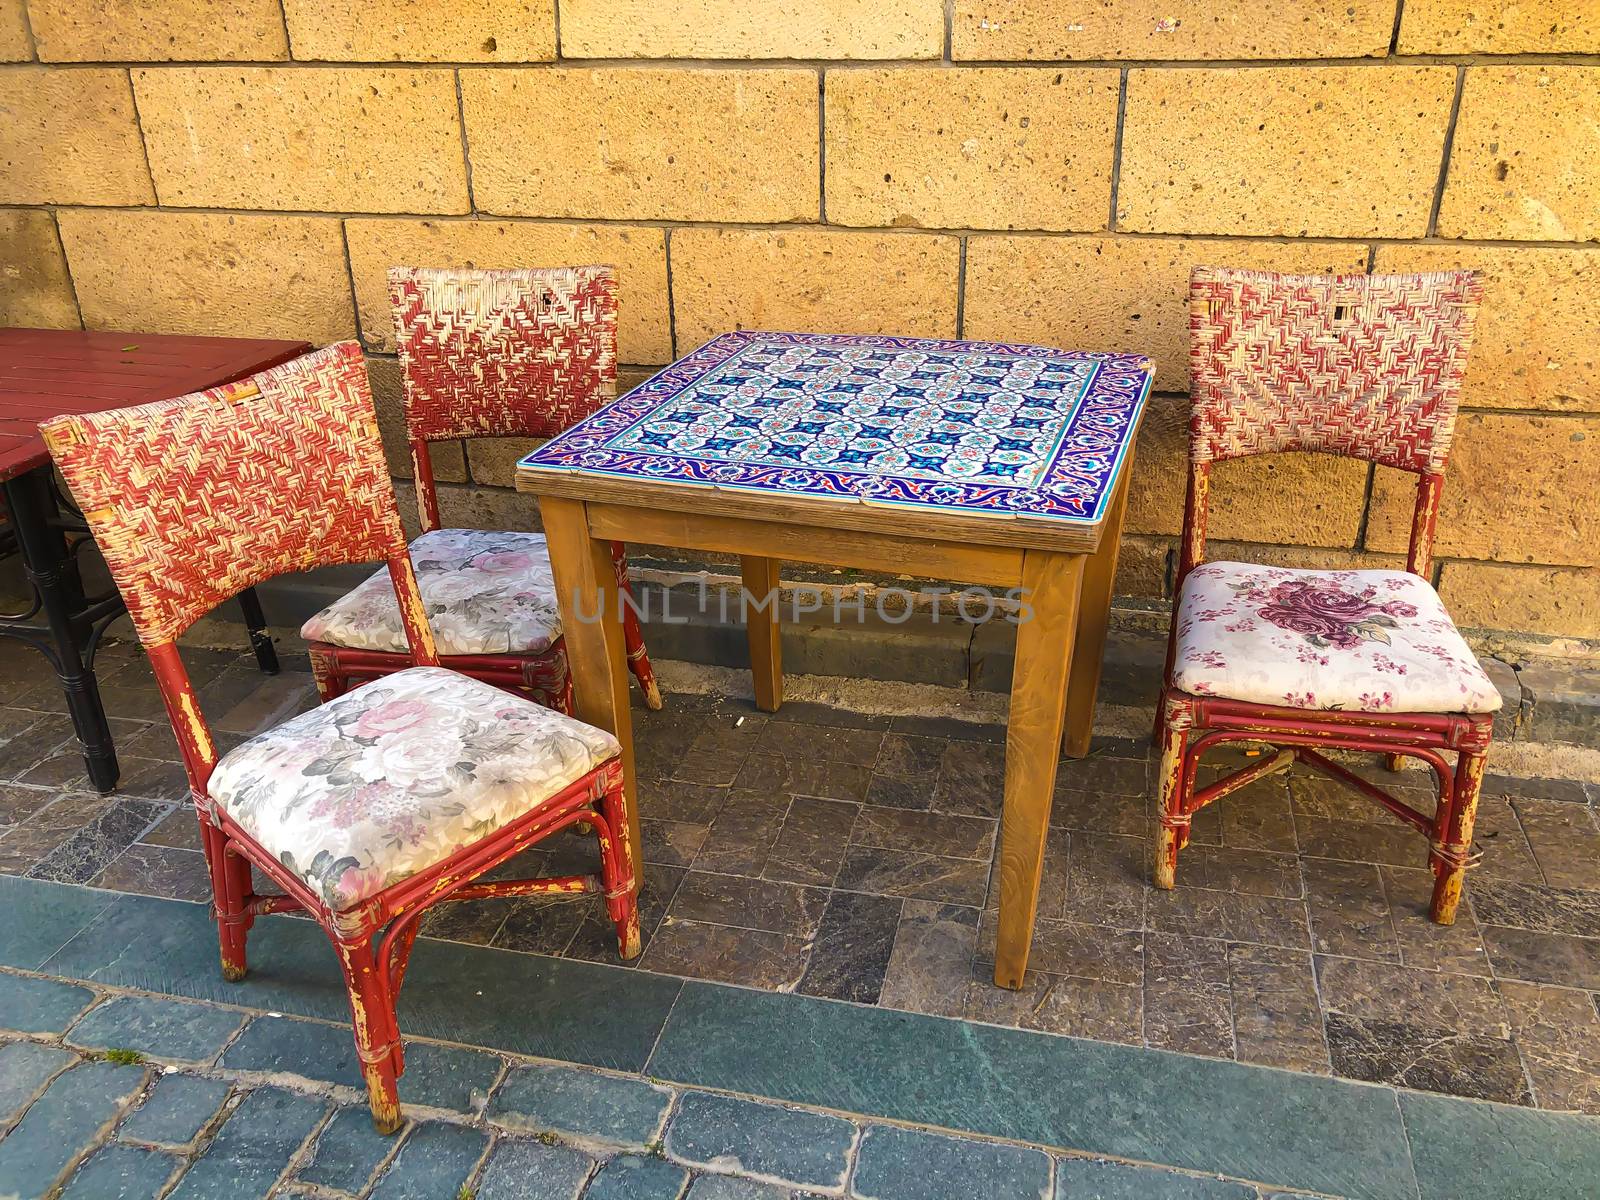 Antique table with blue mosaic tiles and three red old chairs near stone wall